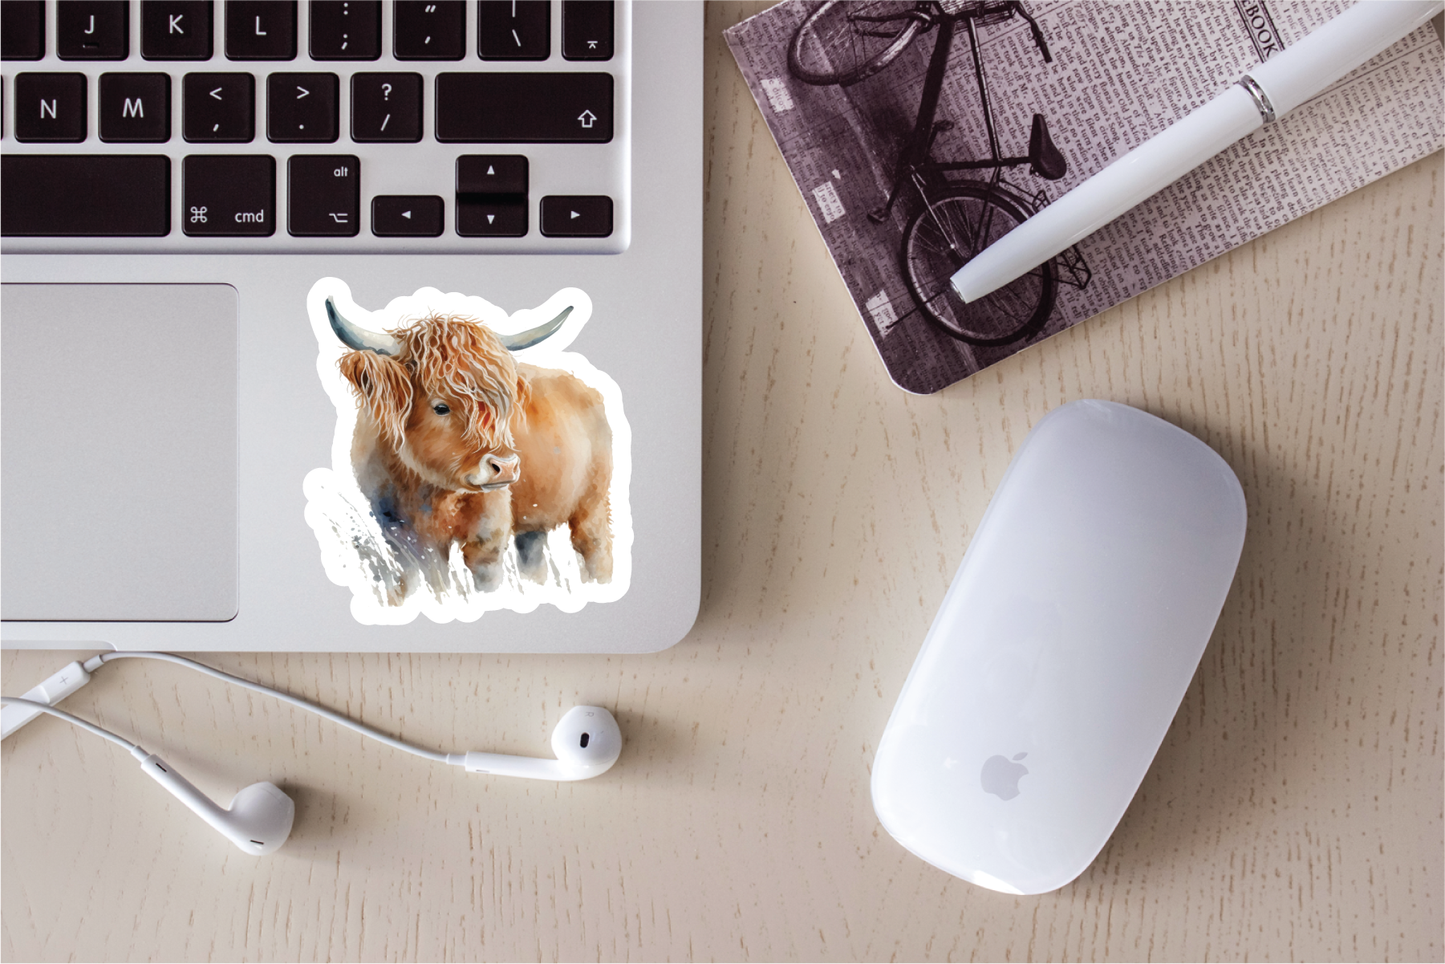 Cute Highland Cows - Full Color Vinyl Stickers (SHIPS IN 3-7 BUS DAYS)